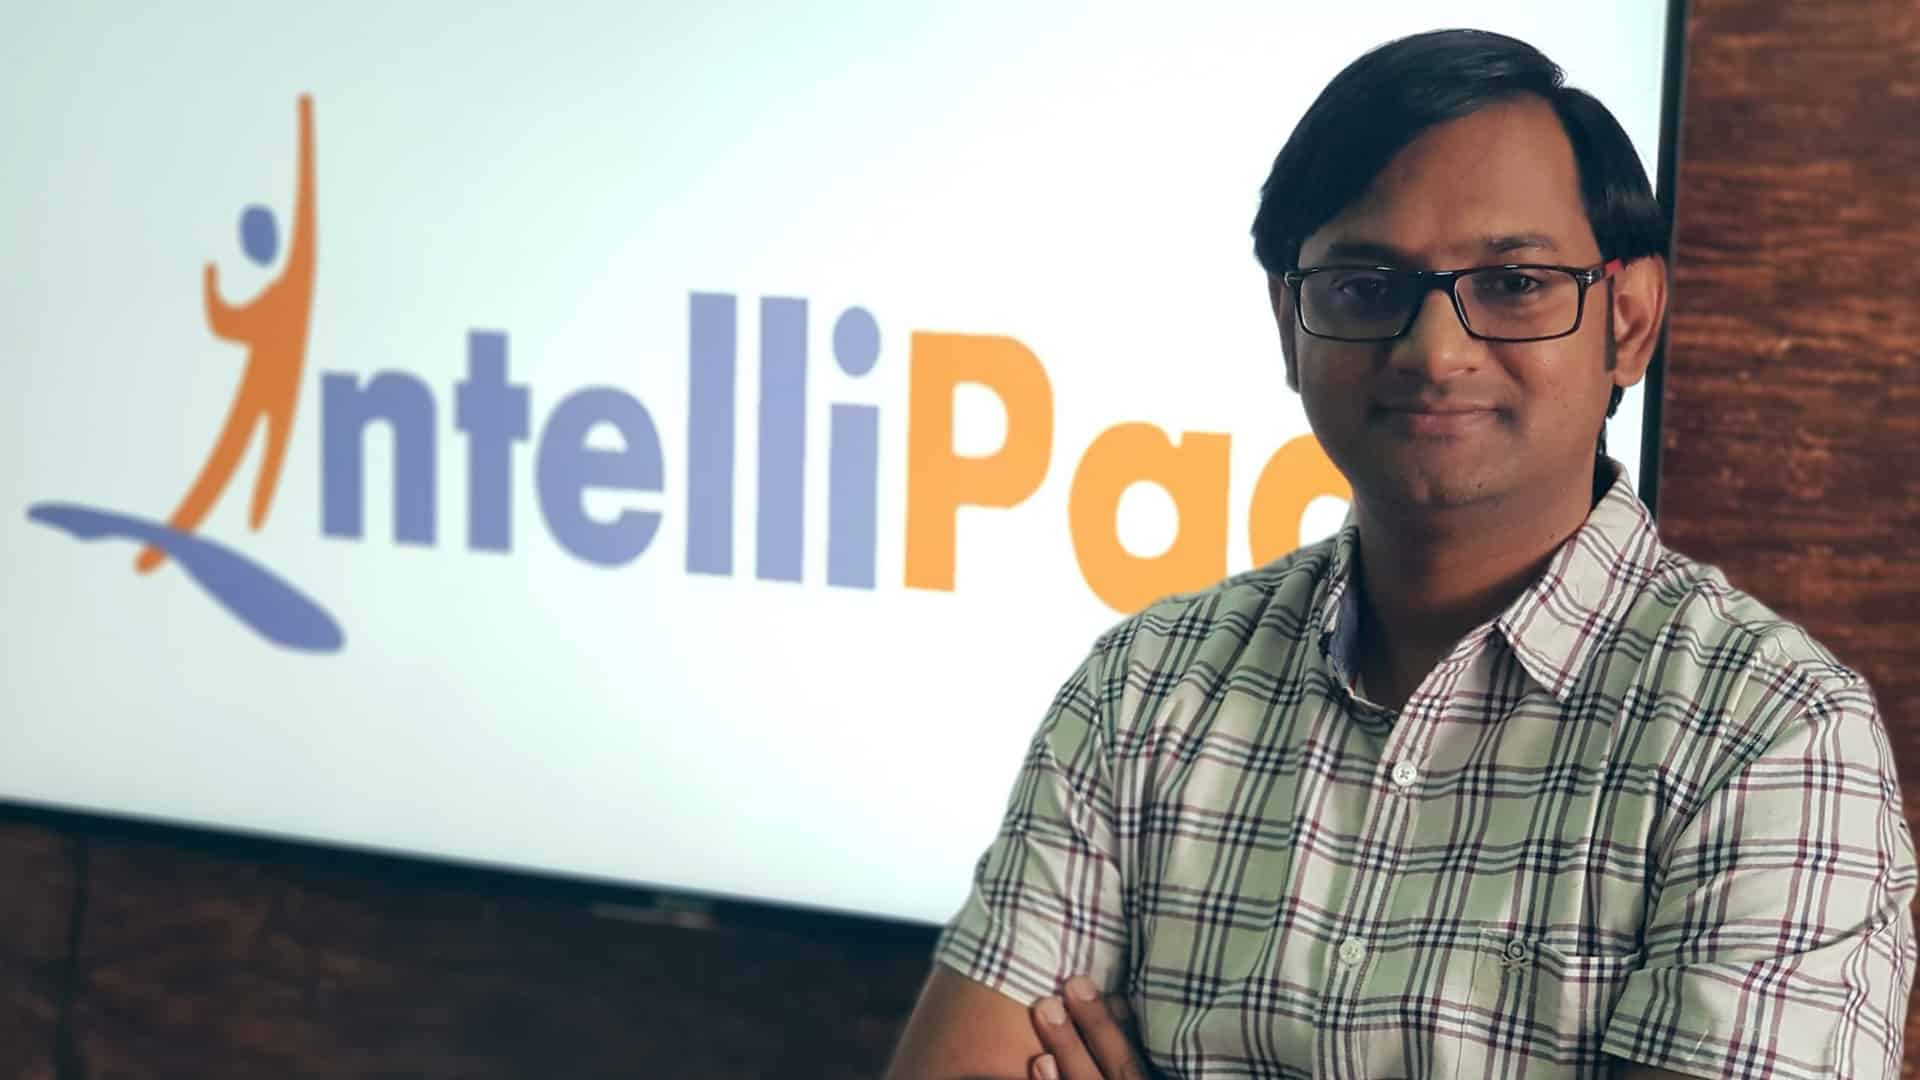 IntelliPaat - Leading Edtech Company grown 100% in the last 4 months looking to raise Series A